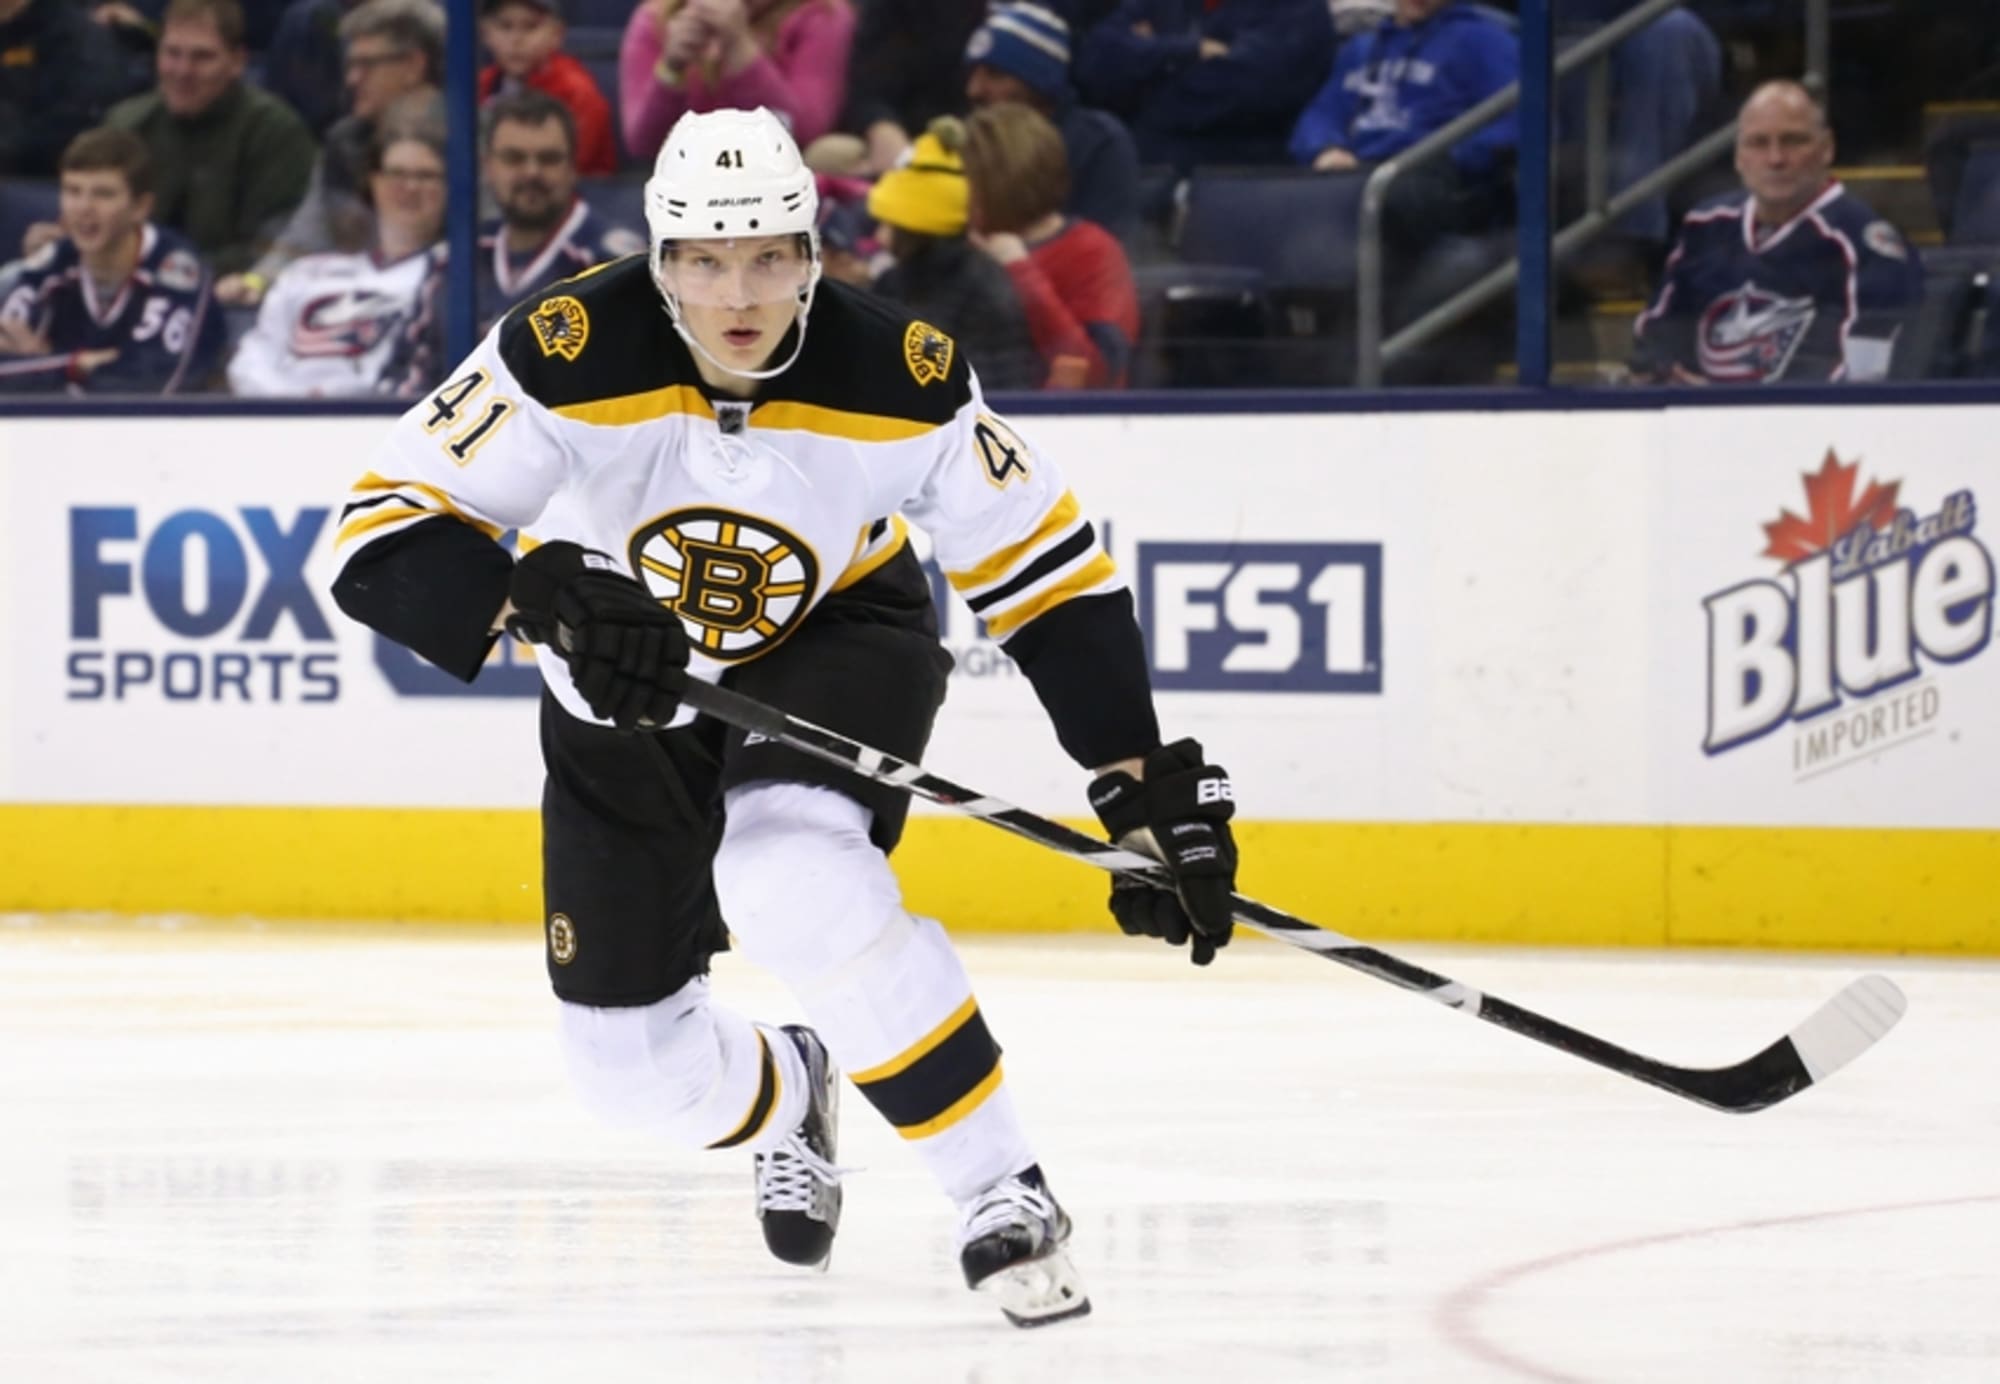 Boston Bruins: Joonas Kemppainen Signs One-Year Contract In KHL